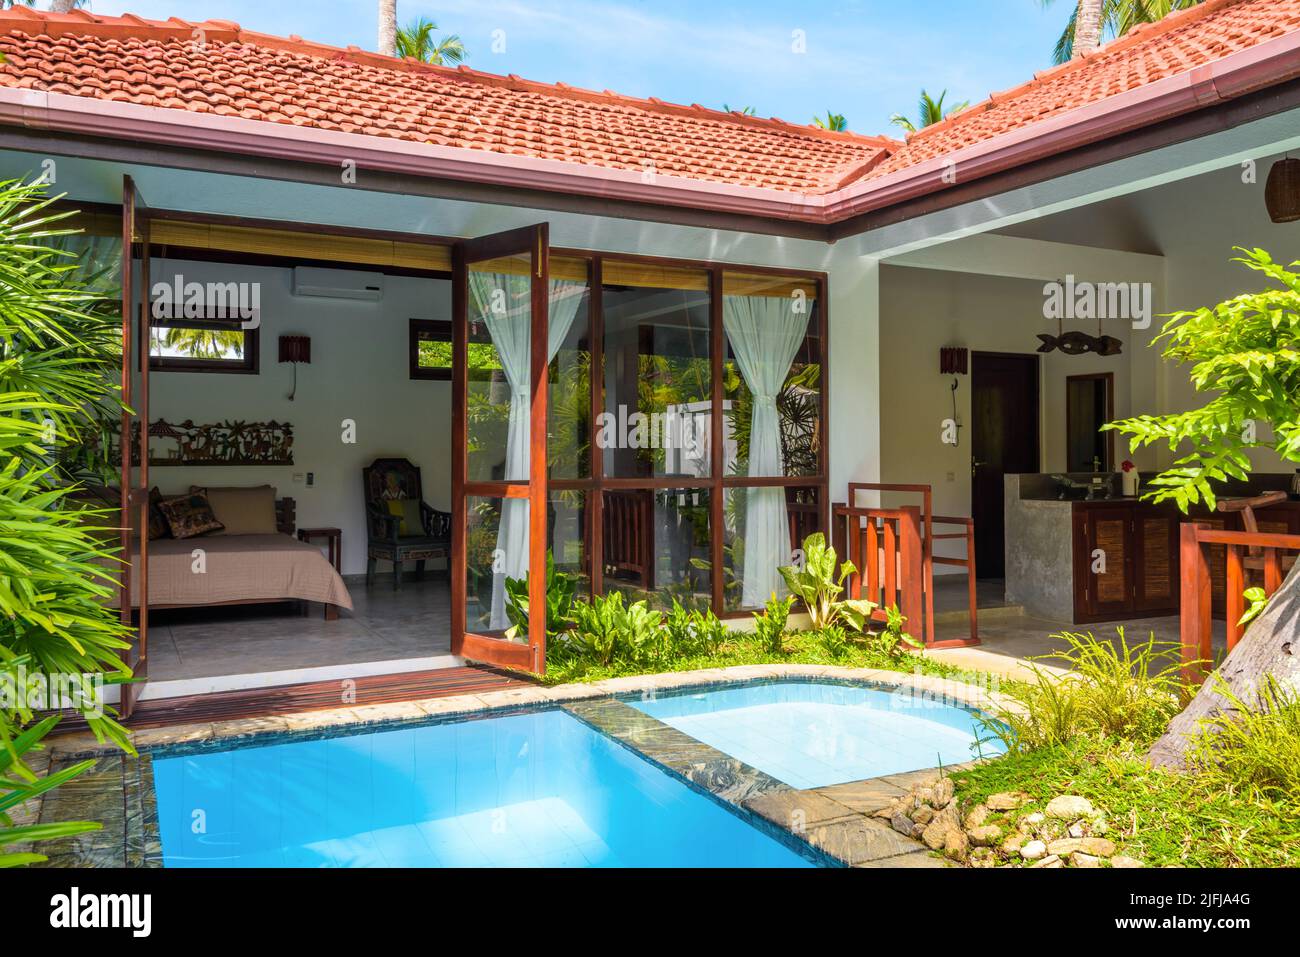 Sri Lanka - Nov 4, 2017: Luxury home with pool in backyard. Summer vacation house in Indian or Caribbean style and garden in courtyard. Nice villa on Stock Photo